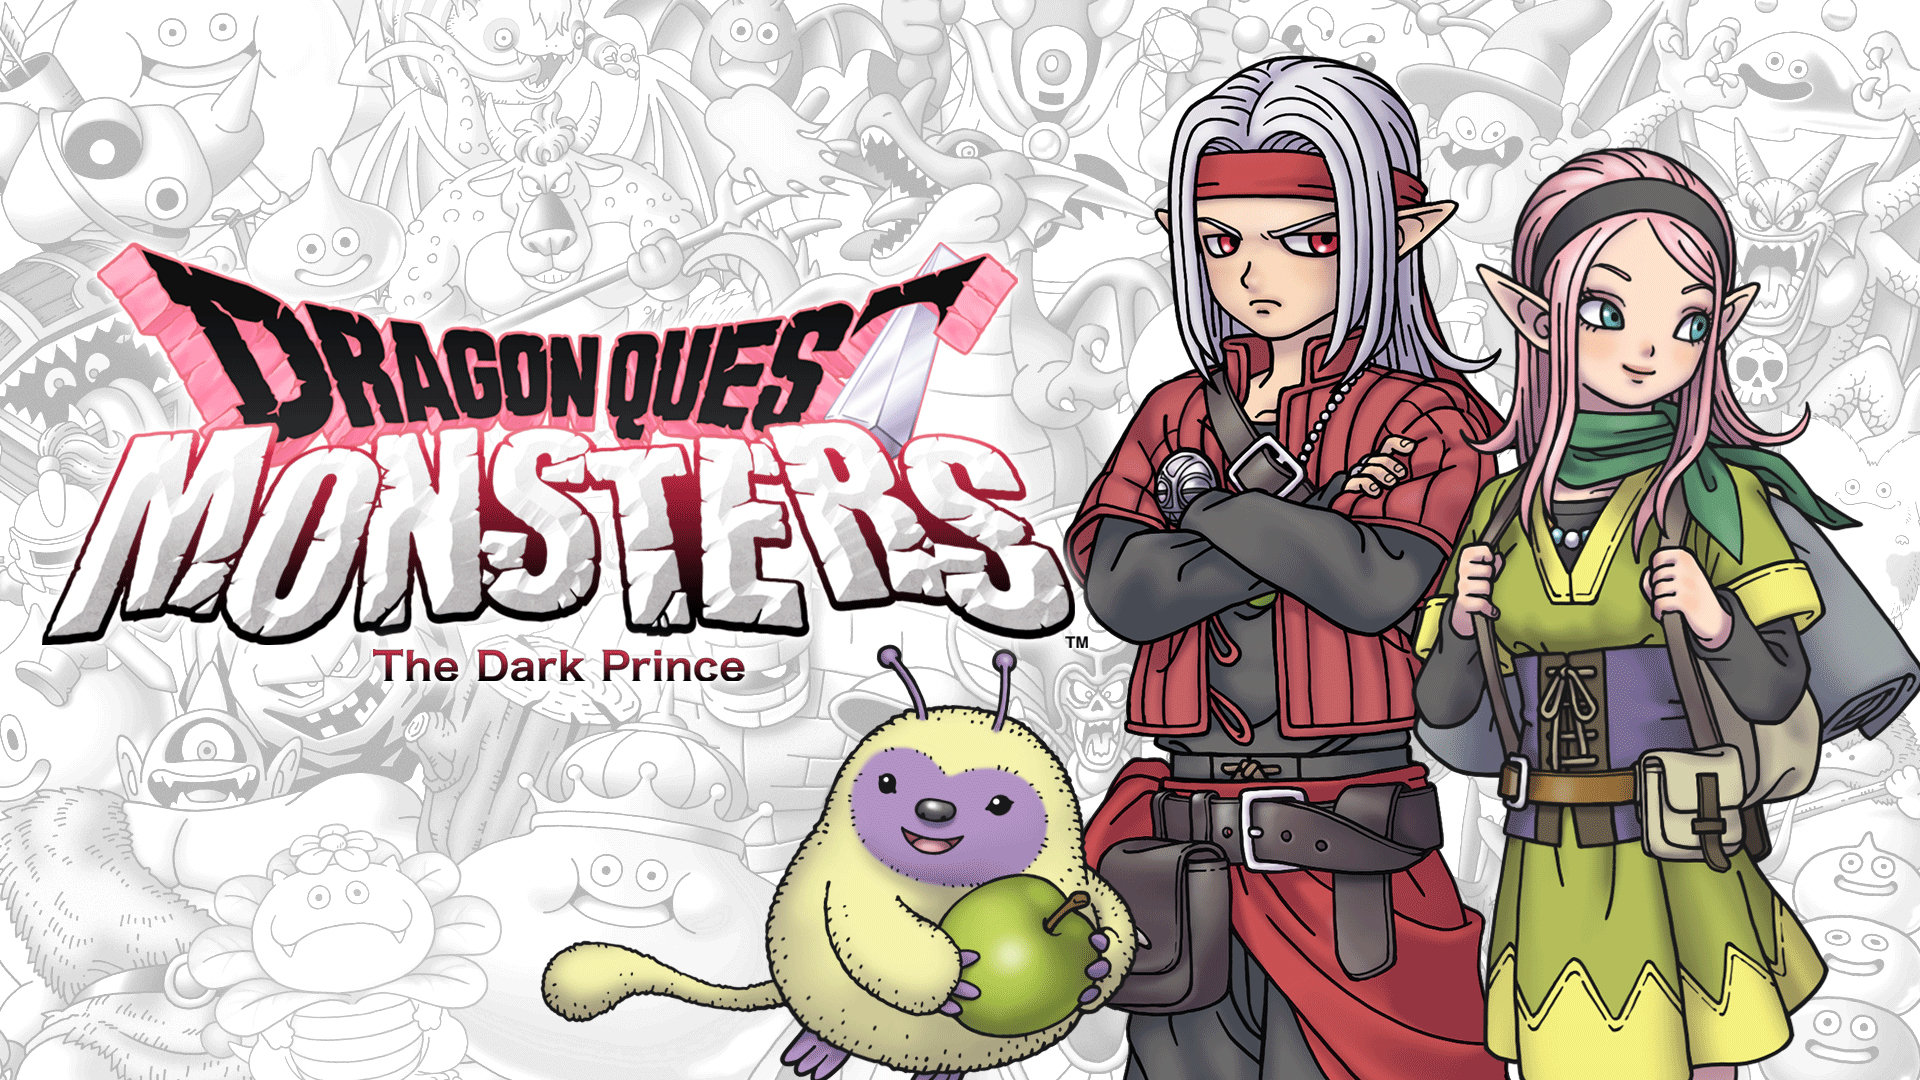 DRAGON QUEST MONSTERS: THE DARK PRINCE Digital Pre-Order Now Available on JP, KR, HK e-shops